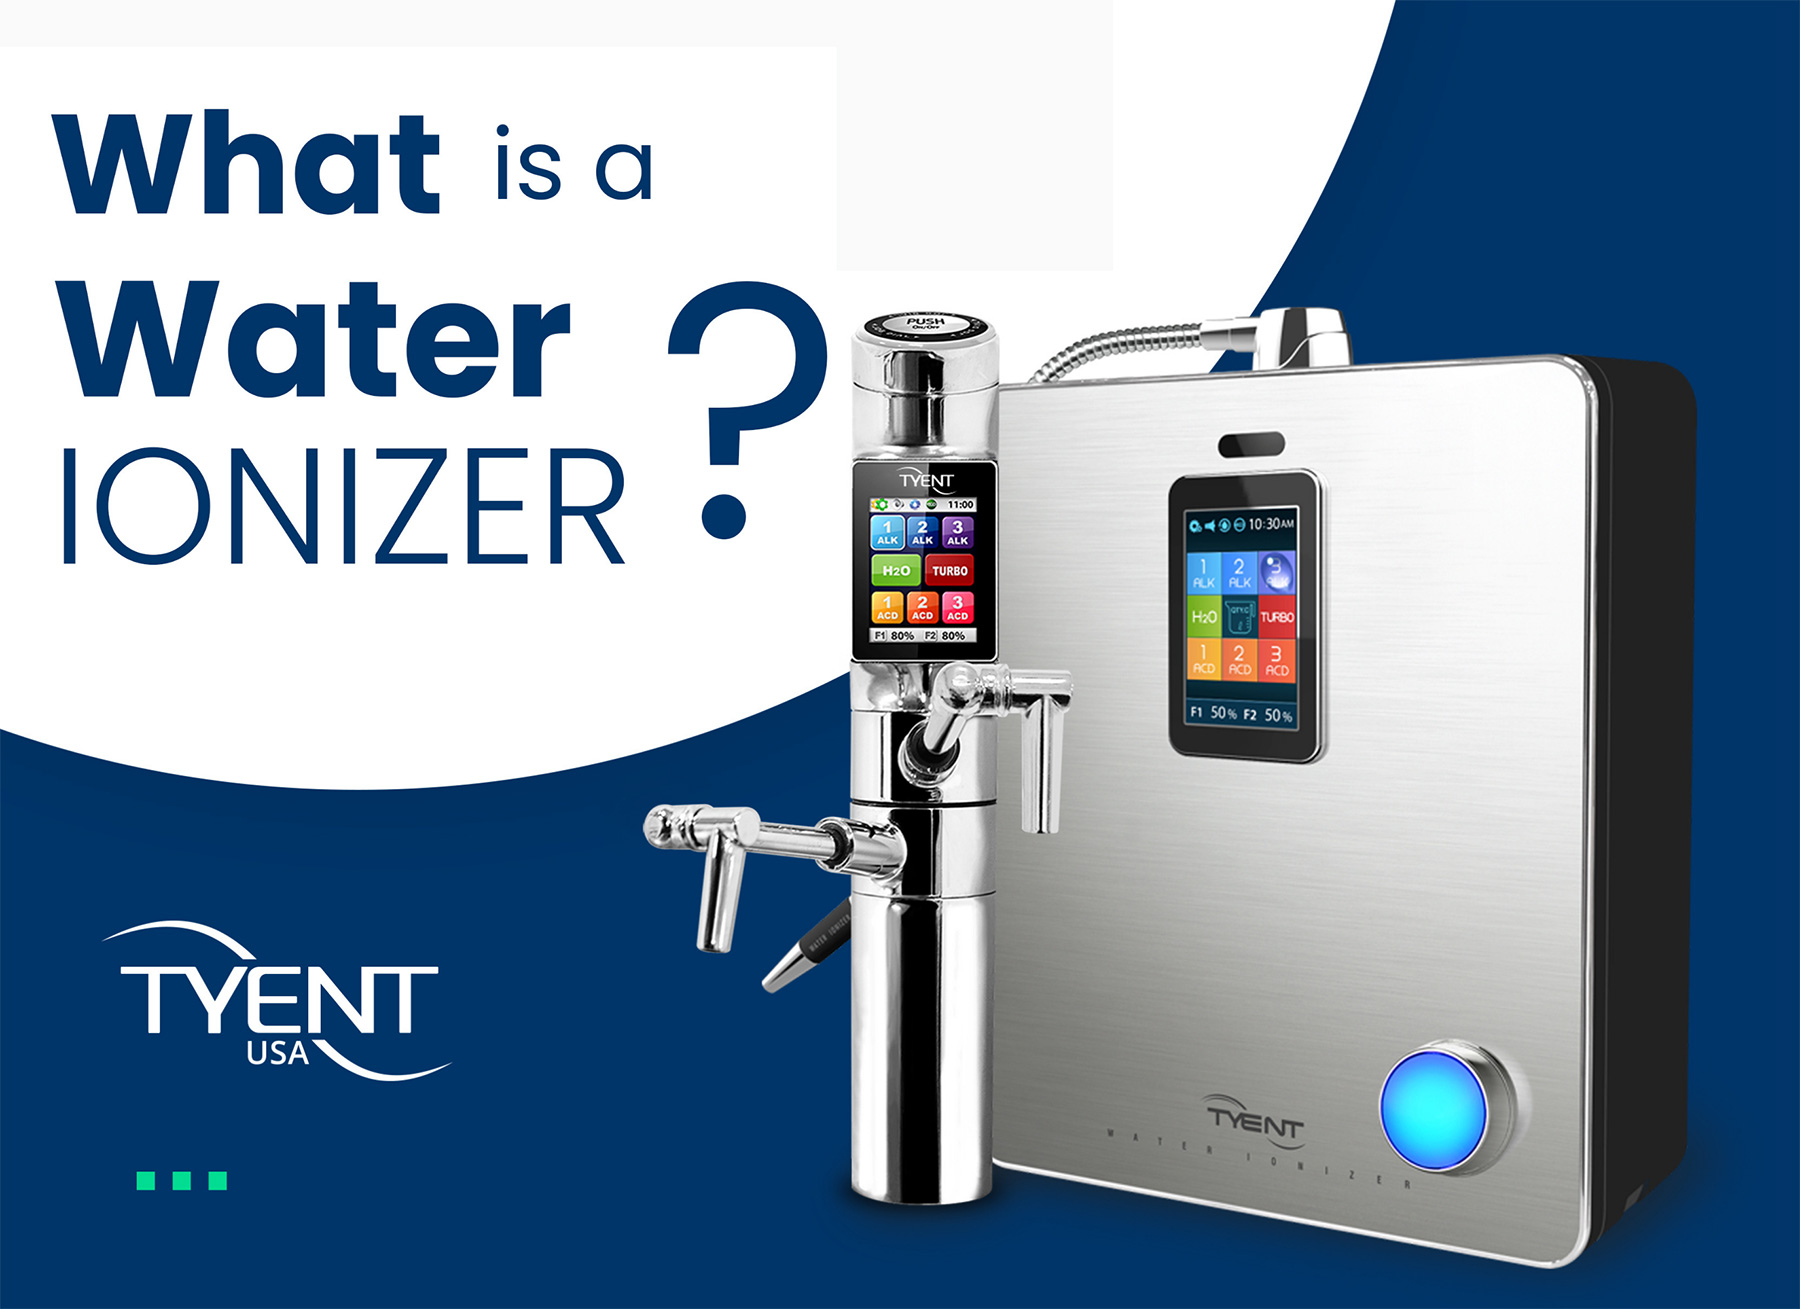 What is a Water Ionizer?